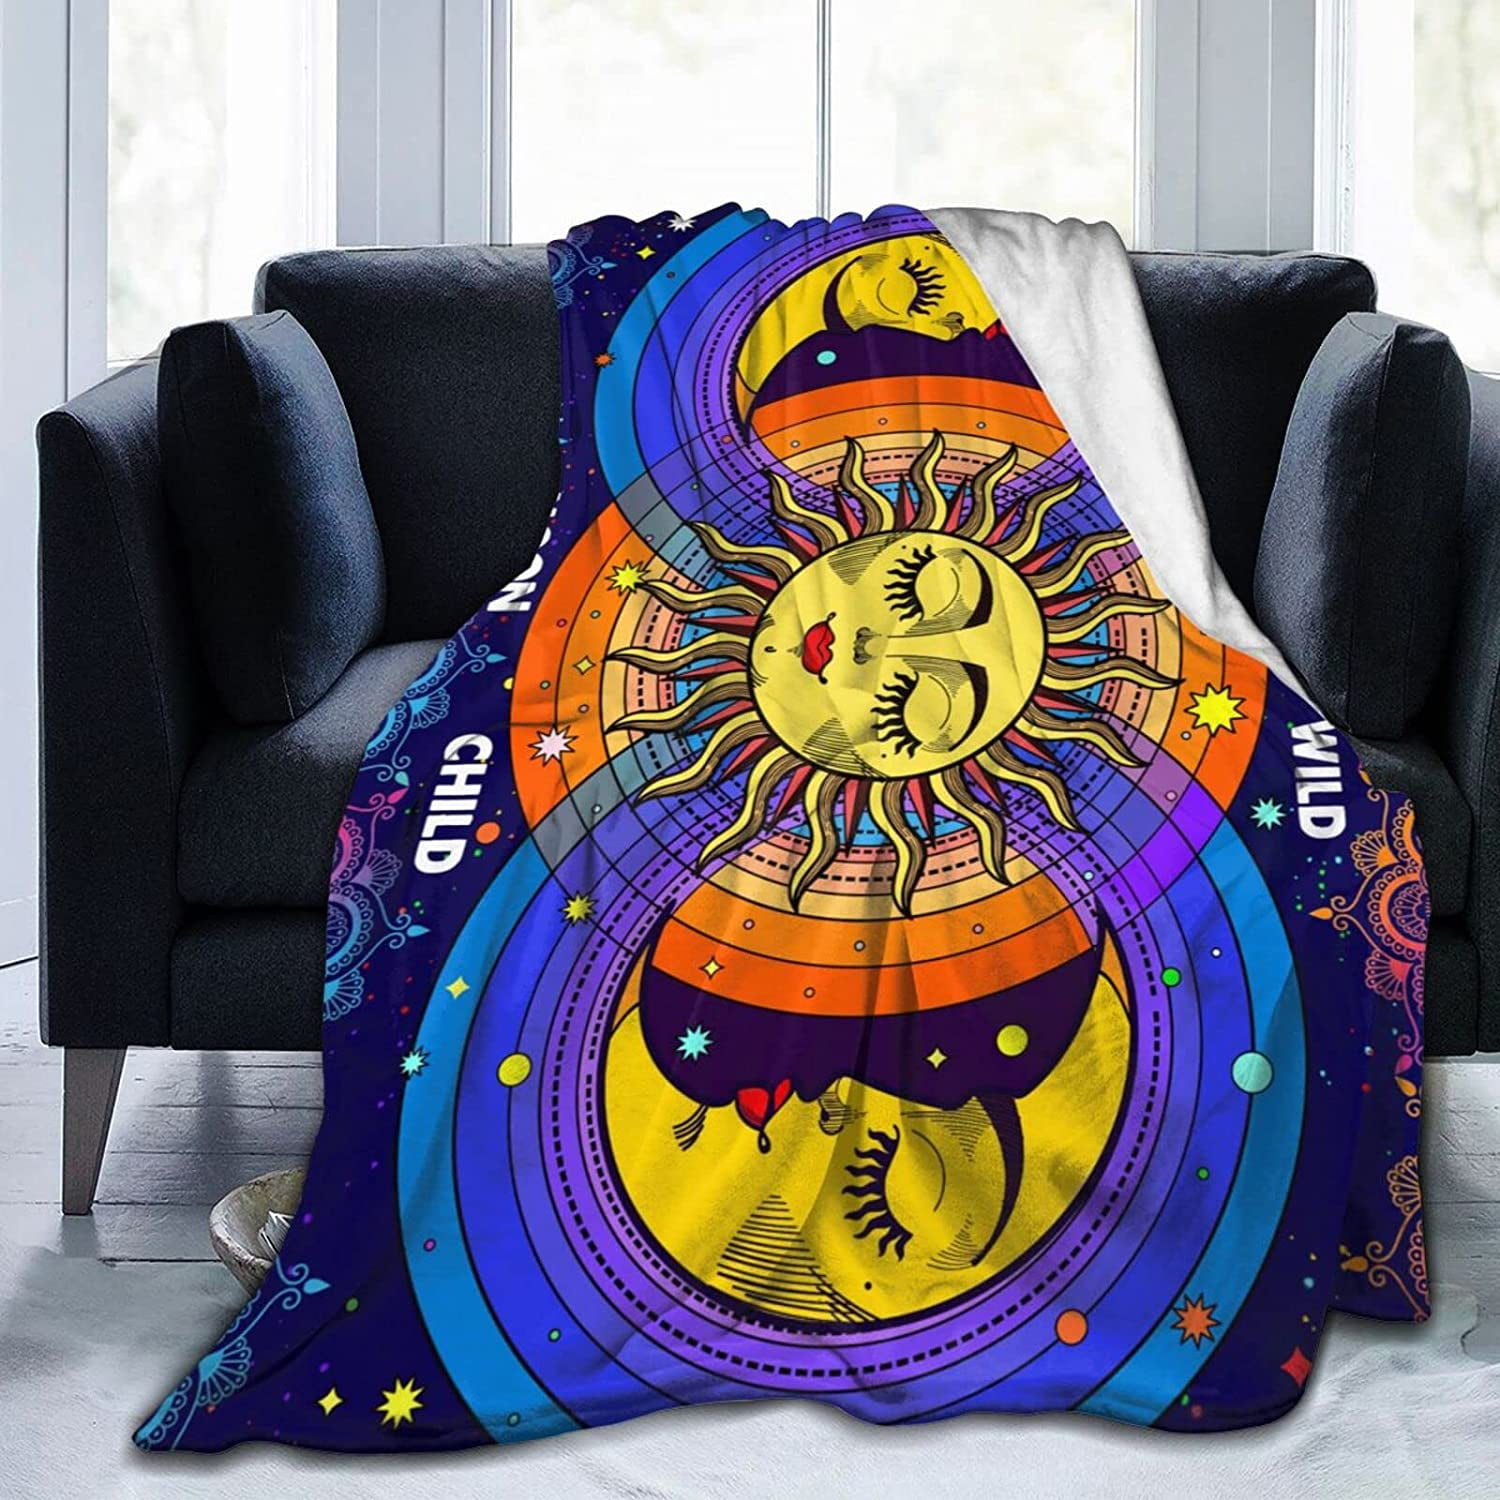 Astrology Decor, Witchy Blanket, Gothic Blanket